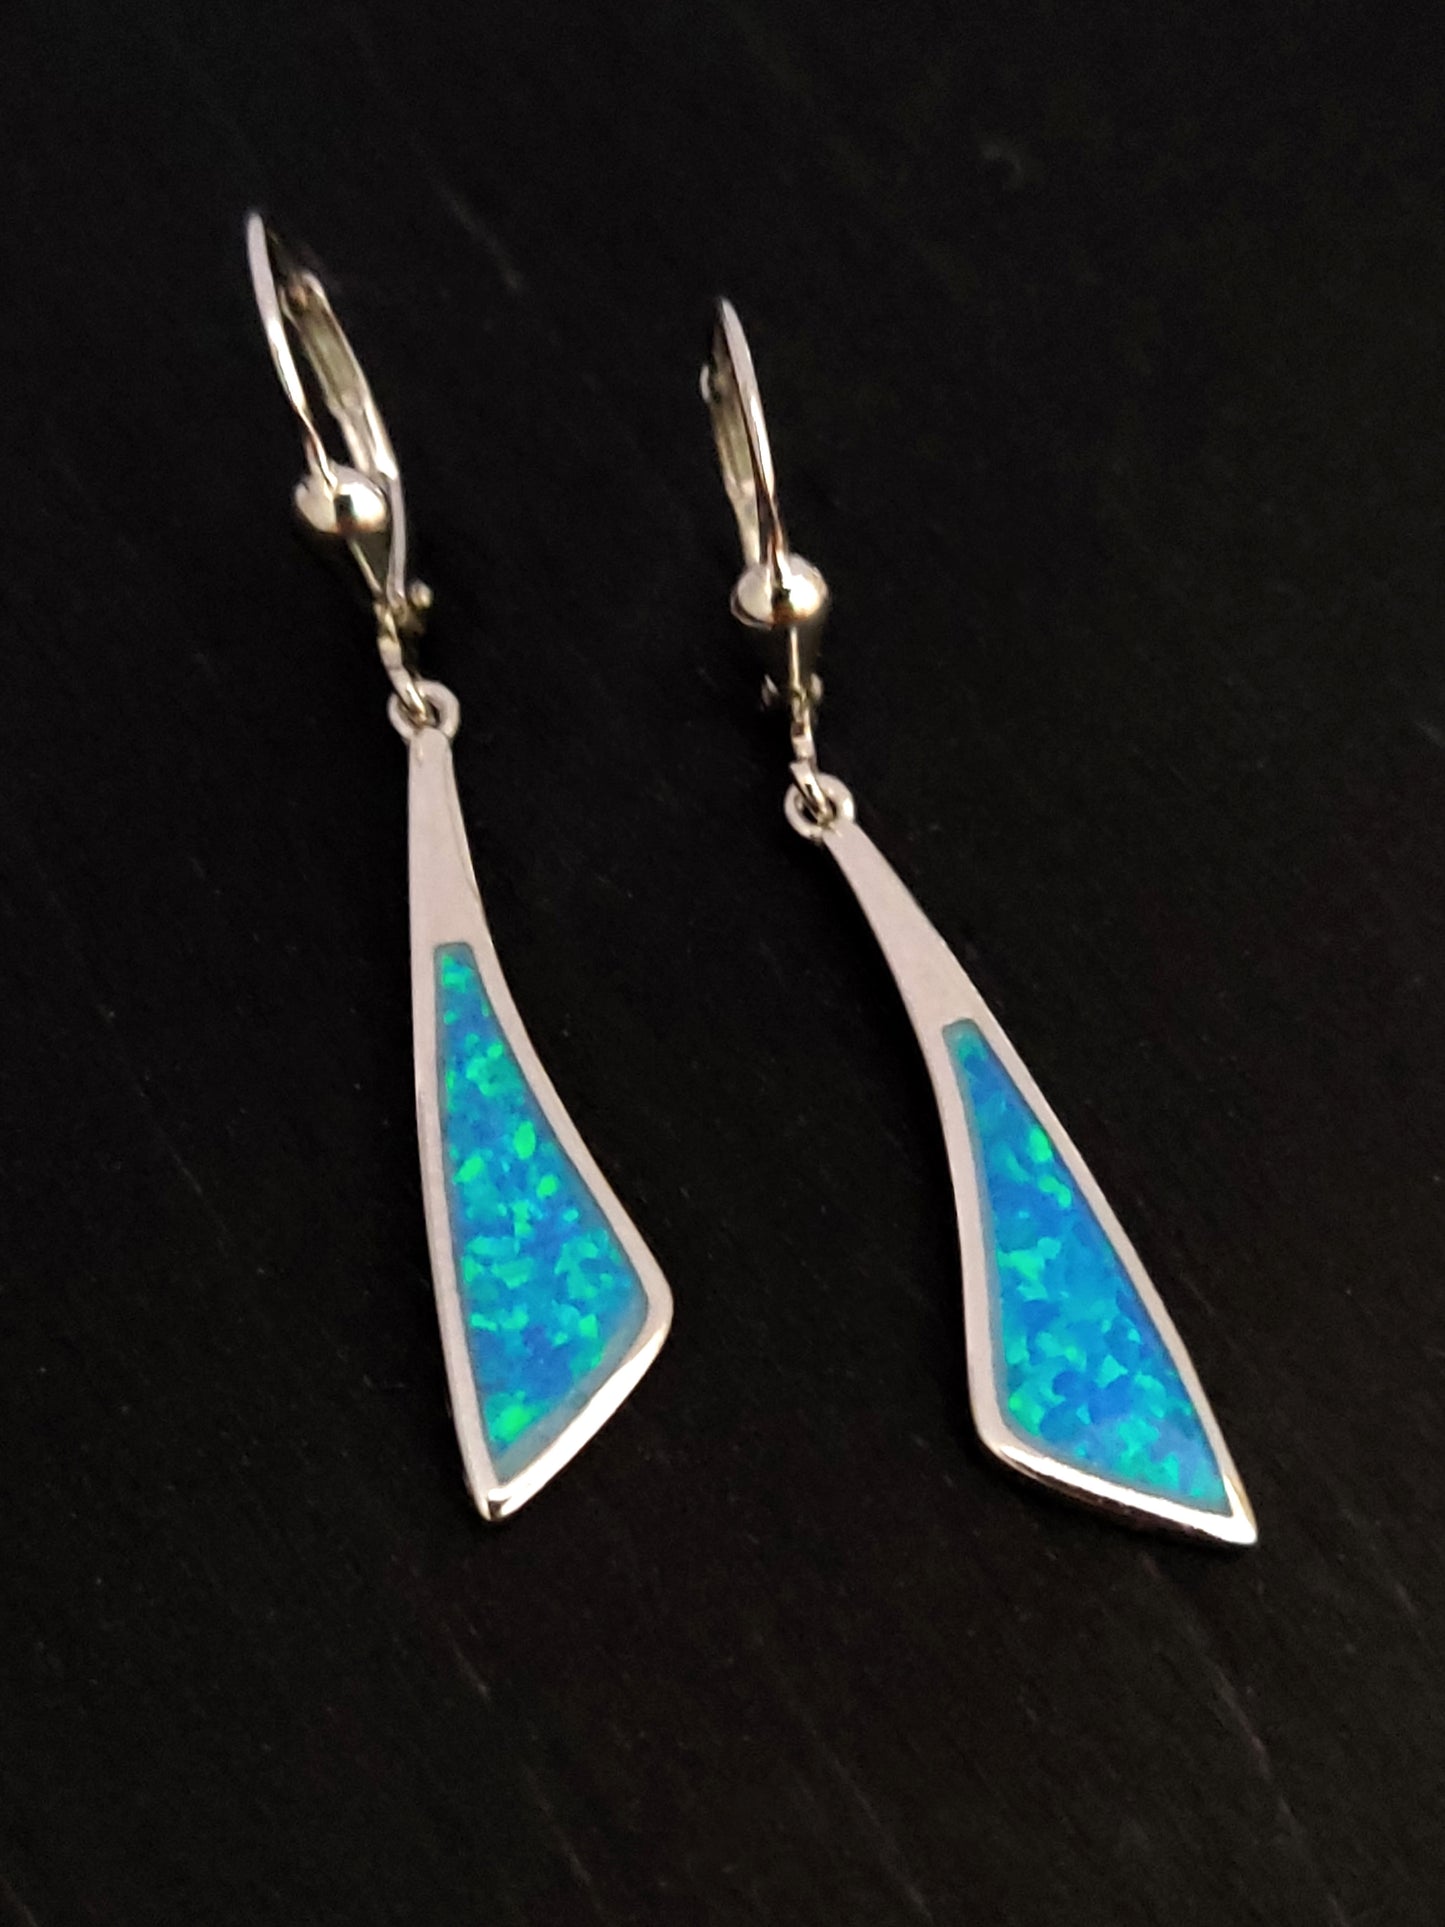 Dangle curved form earrings made of sterling silver 925 and blue opal stones on black background.